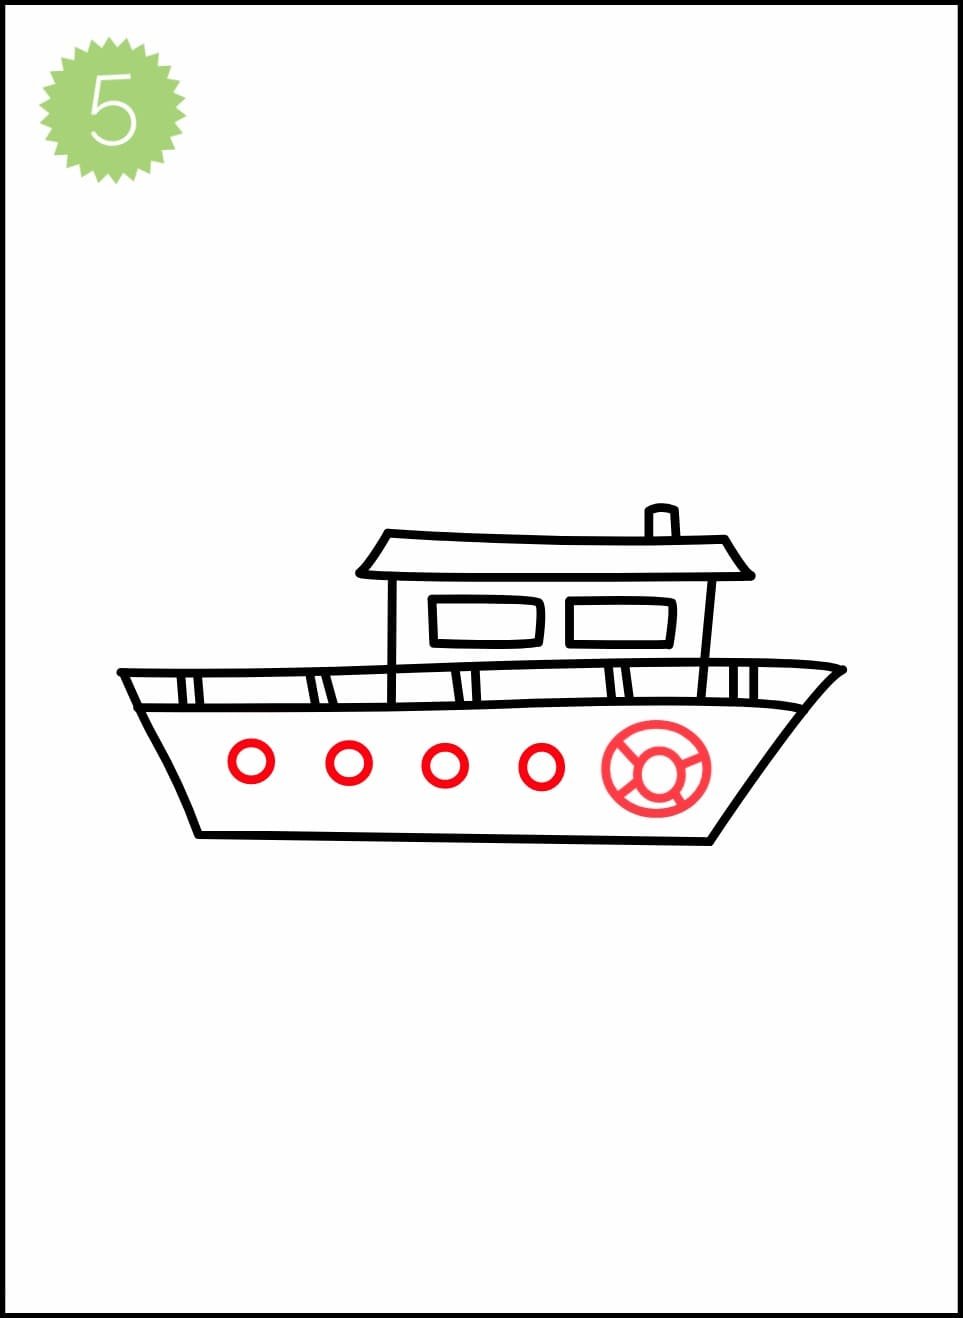 How To Draw Coloring Ship For Kids Drawing And Coloring Pages For Kids ...  | Coloring pages for kids, Drawing for kids, Coloring for kids